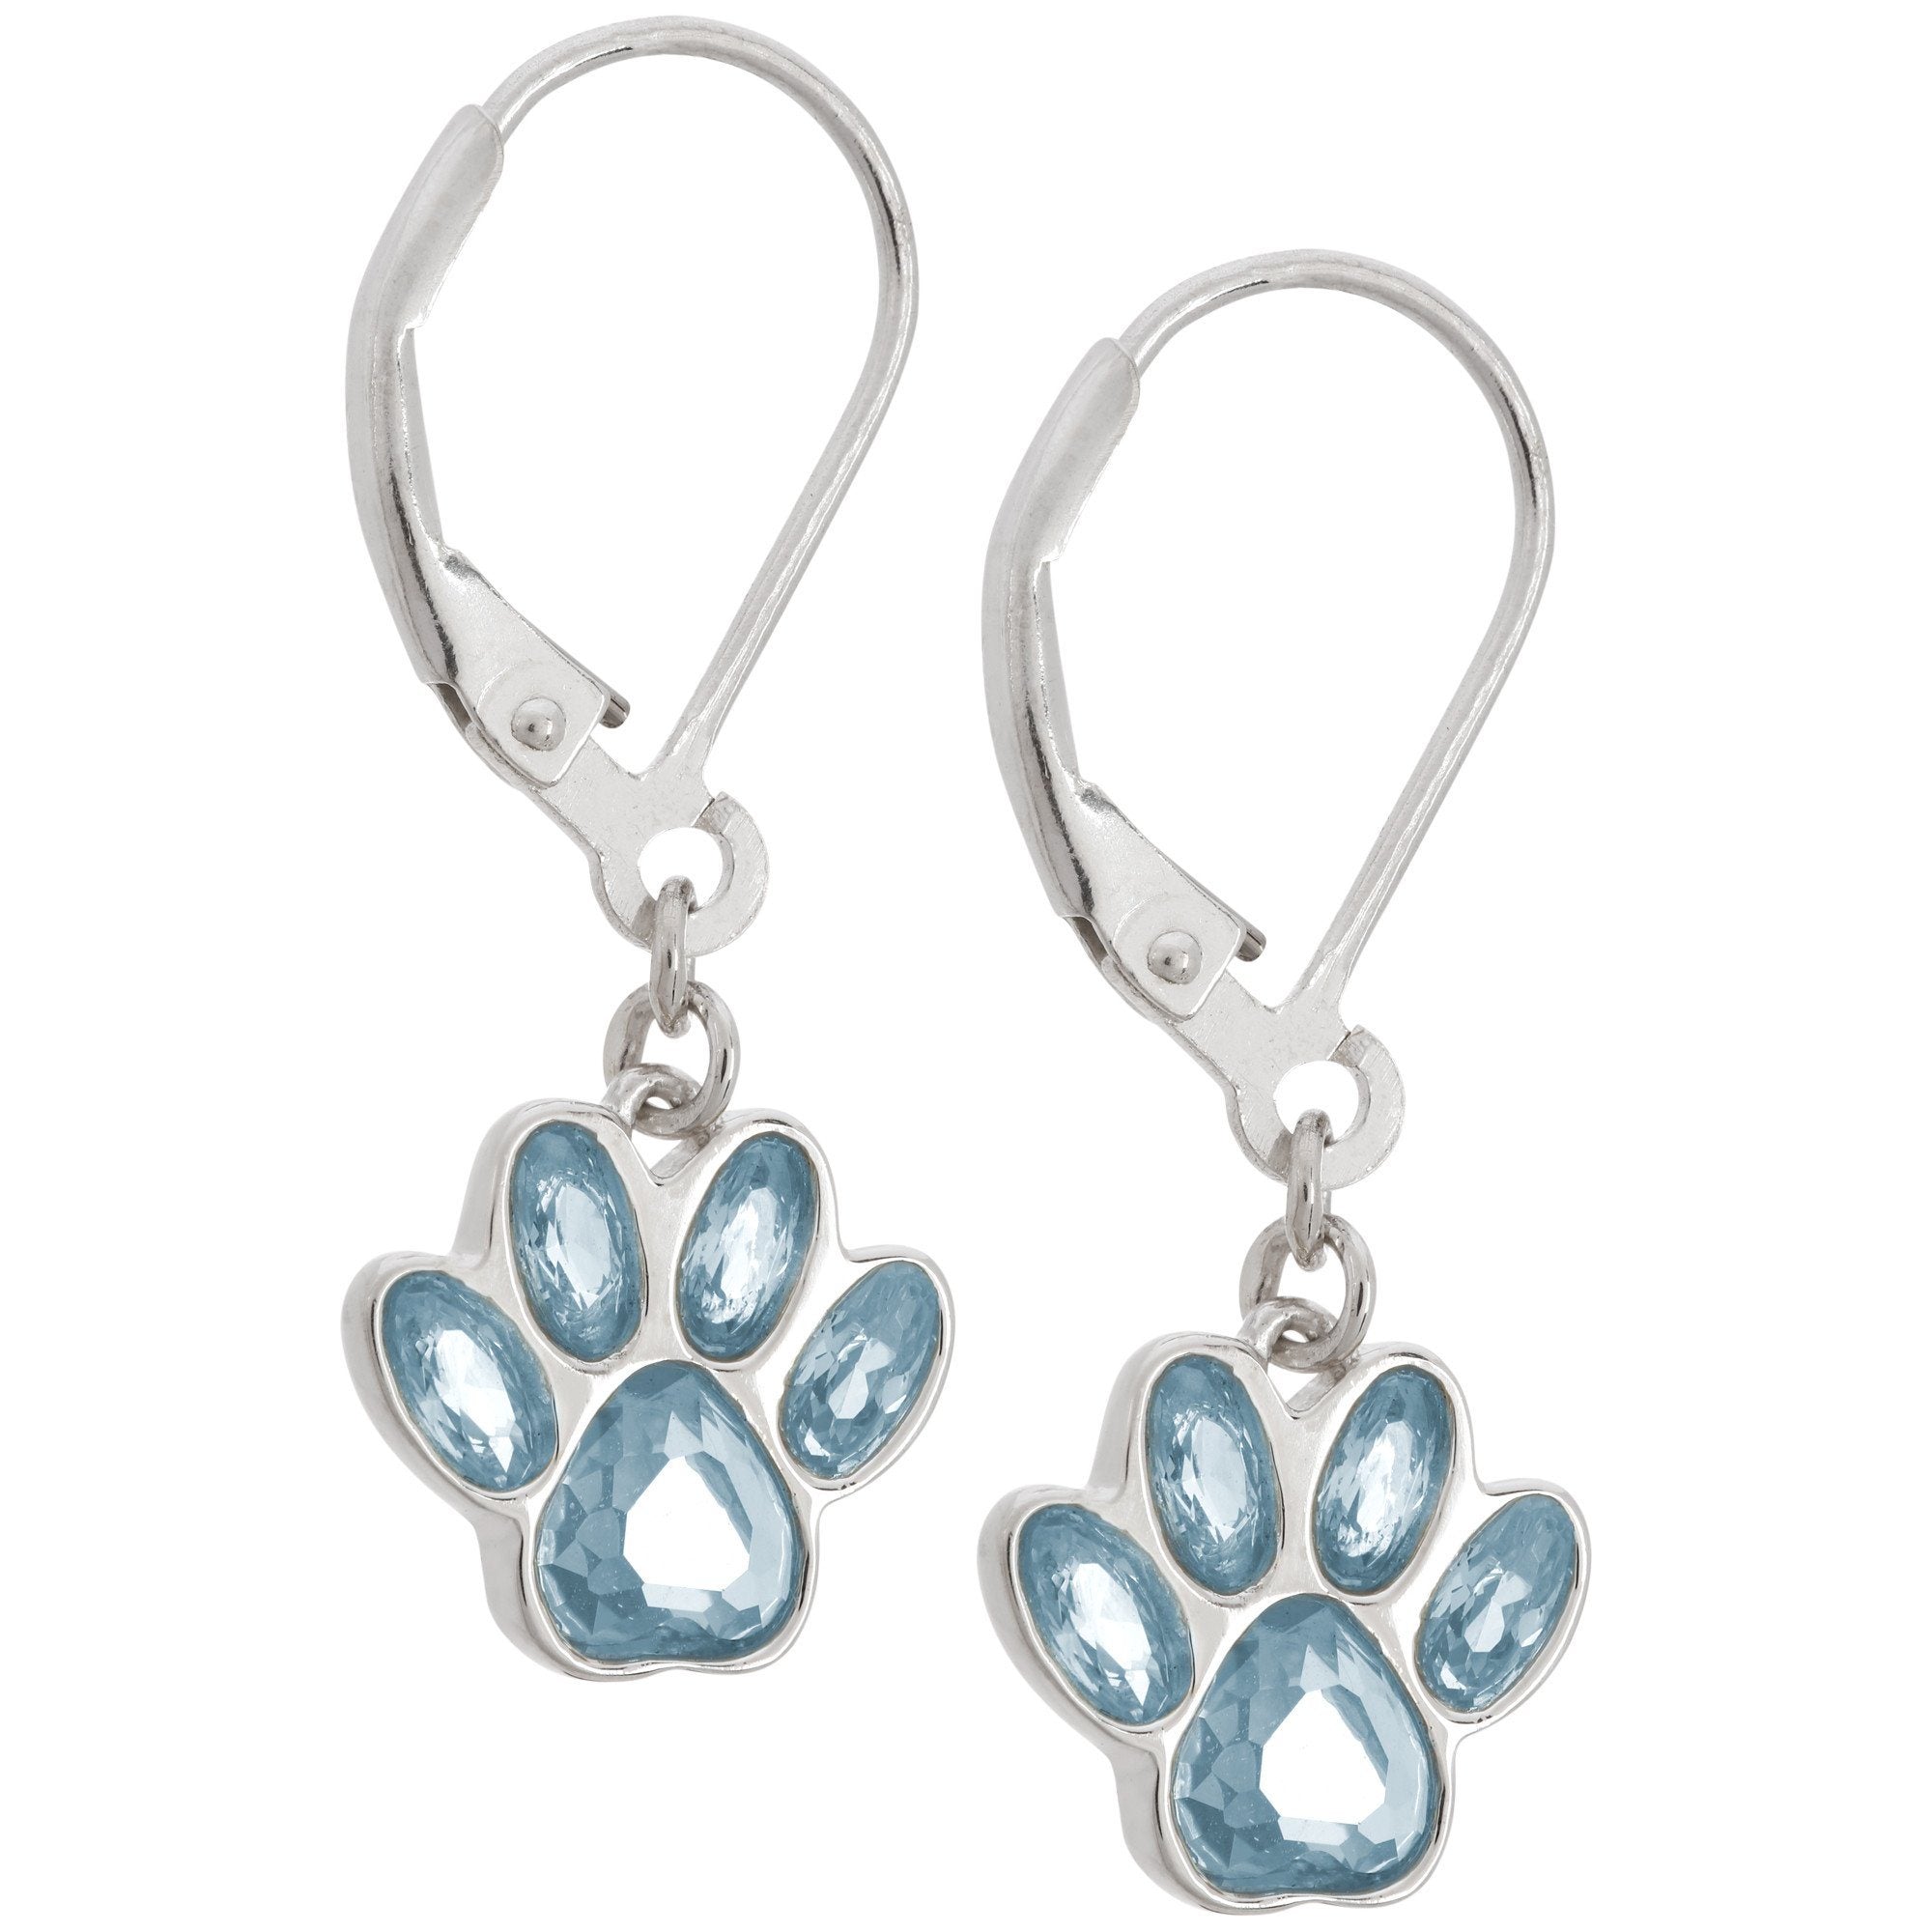 Paw Print Birthstone Dangling Sterling Earrings - March - 2 Pairs